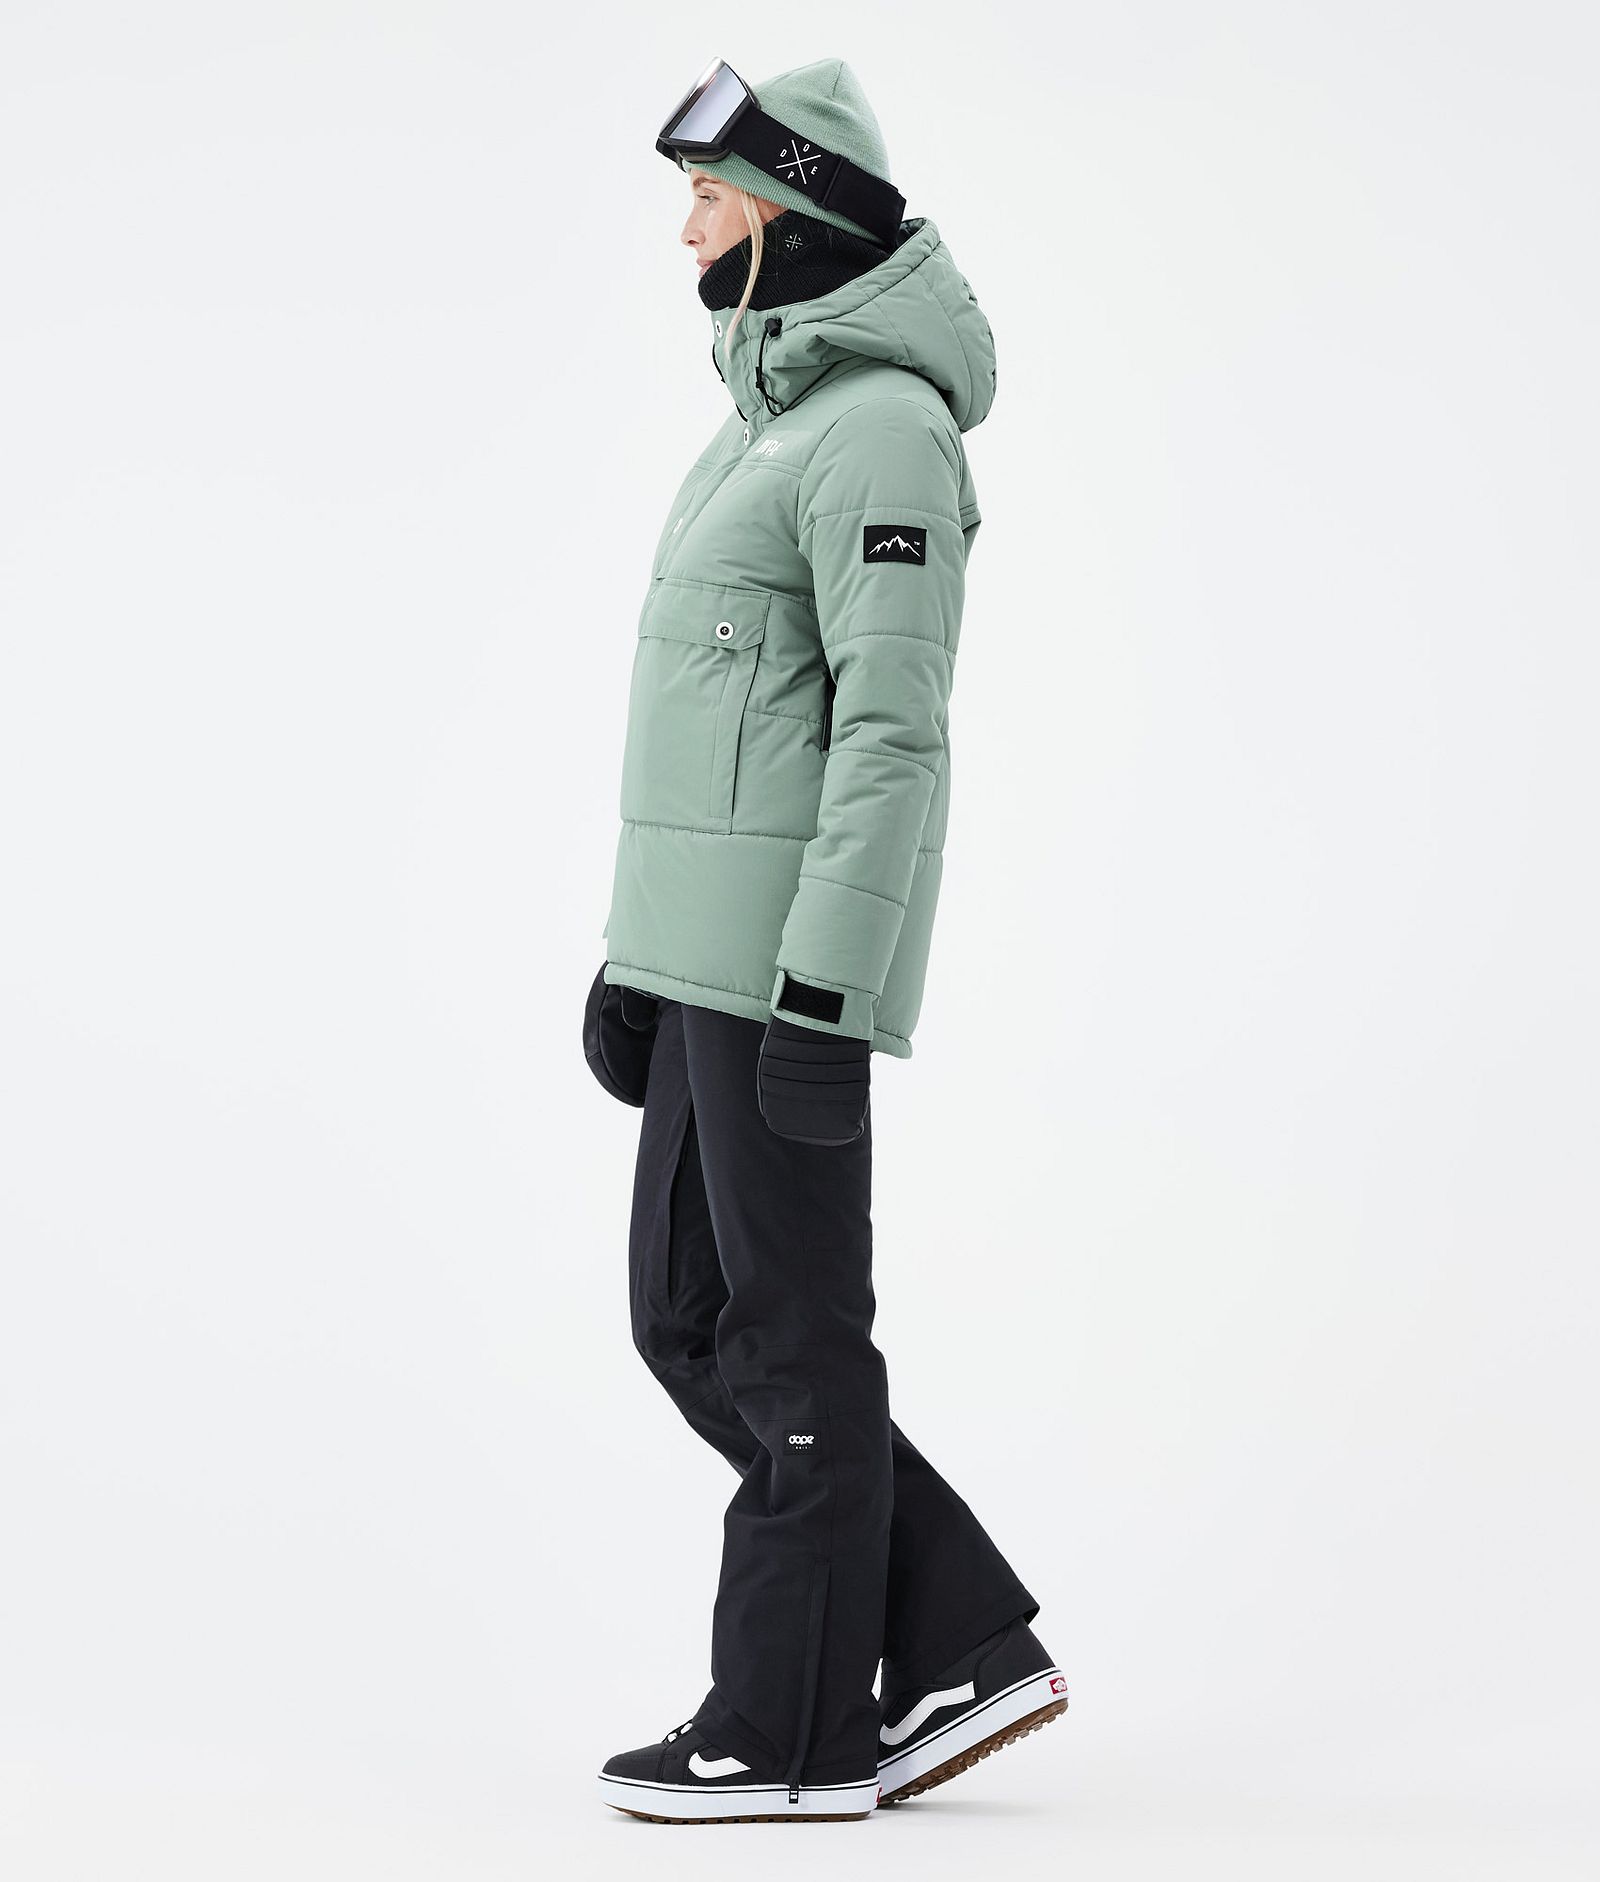 Dope Puffer W Snowboard jas Dames Faded Green